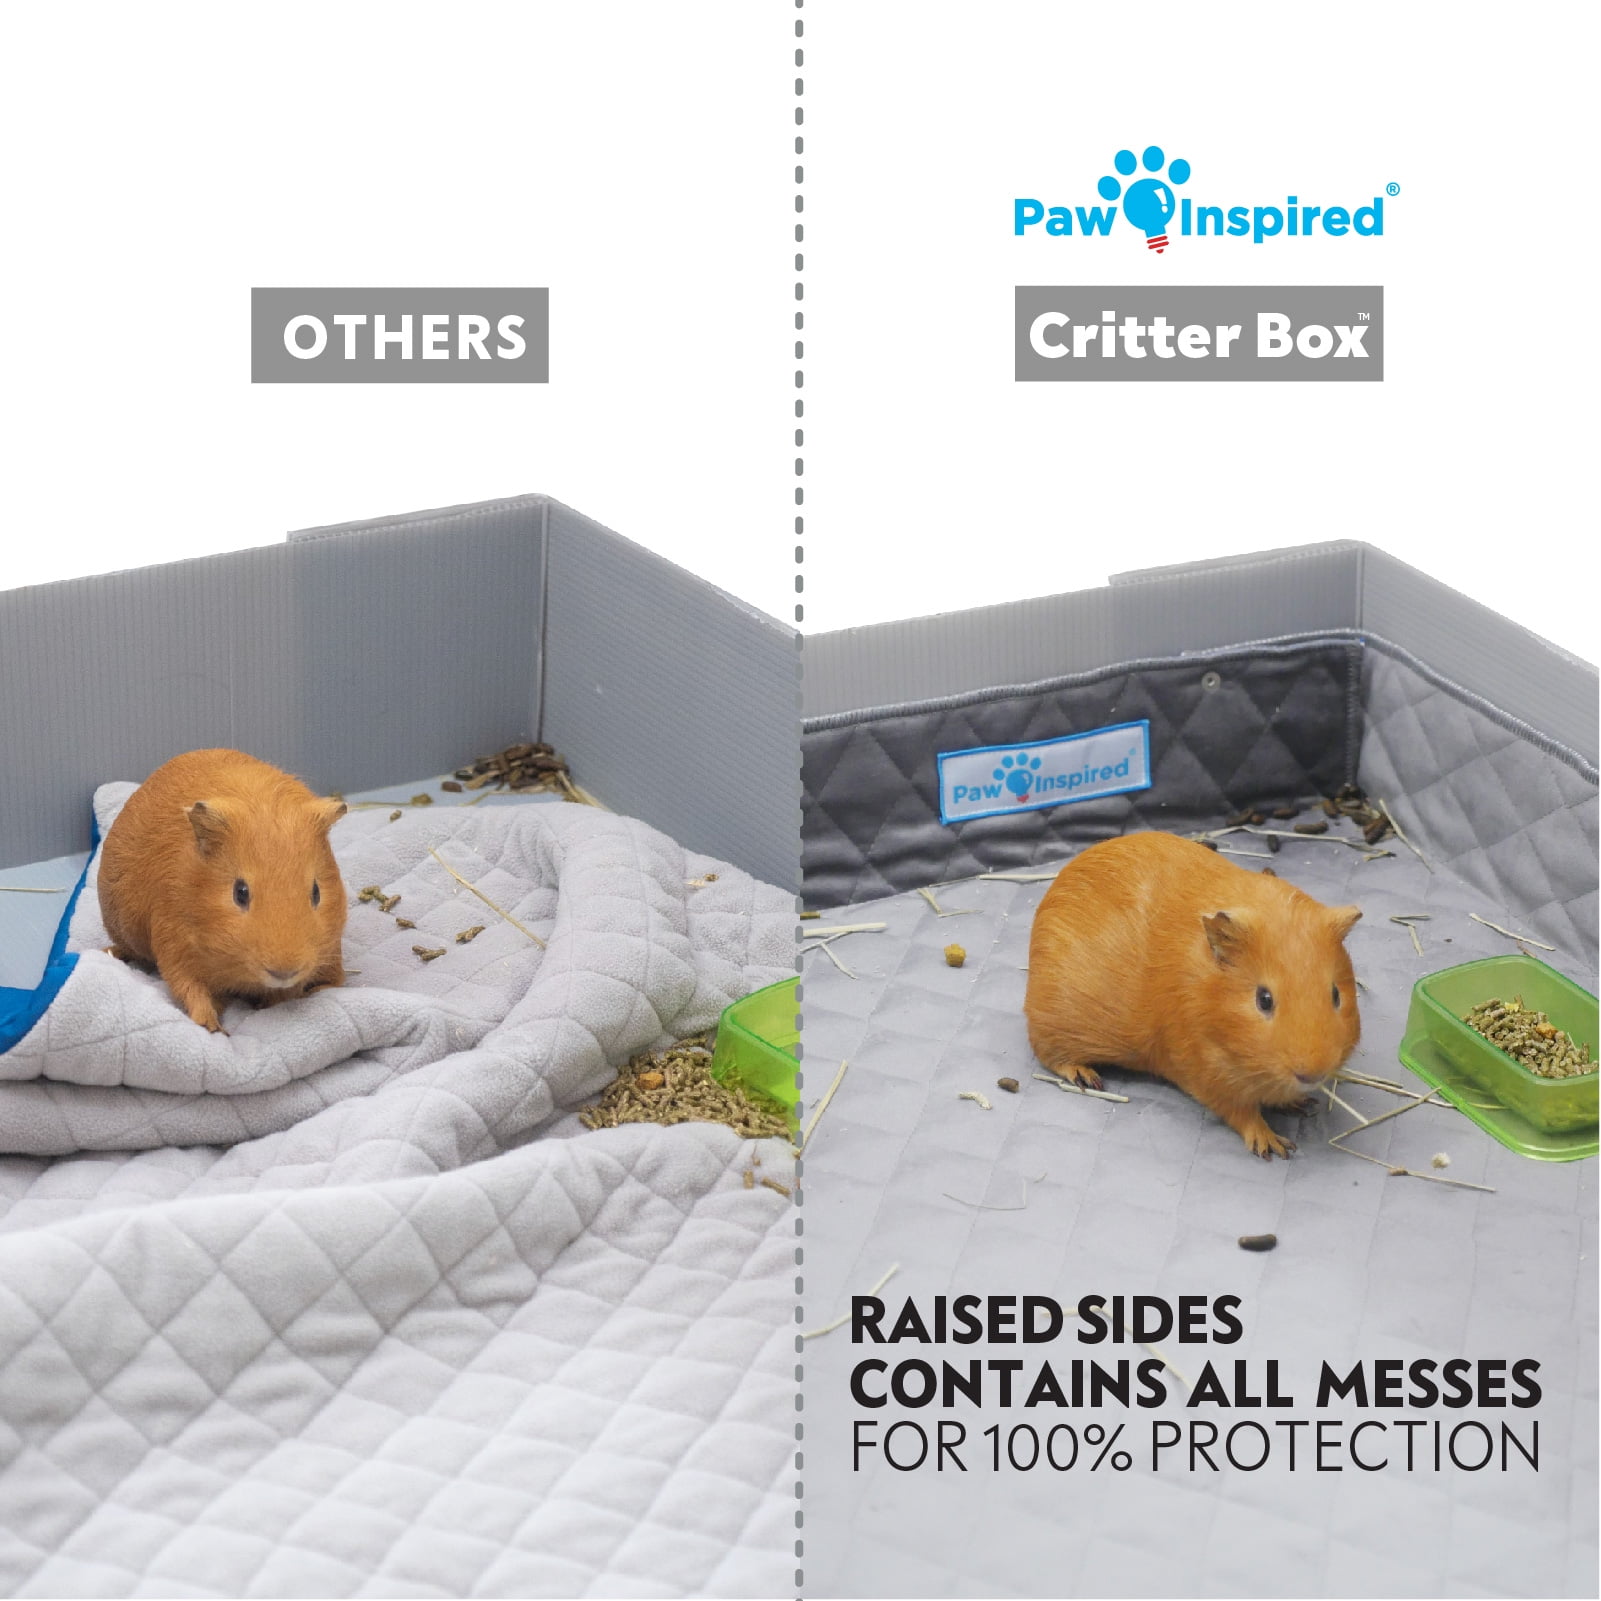 Edge Protected Pee Pads & All Small Animals Hamsters Paw Inspired Critter Box Super Absorbent Fleece Bedding for Guinea Pigs Rabbits Washable Guinea Pig Cage Liners with Raised Sides 